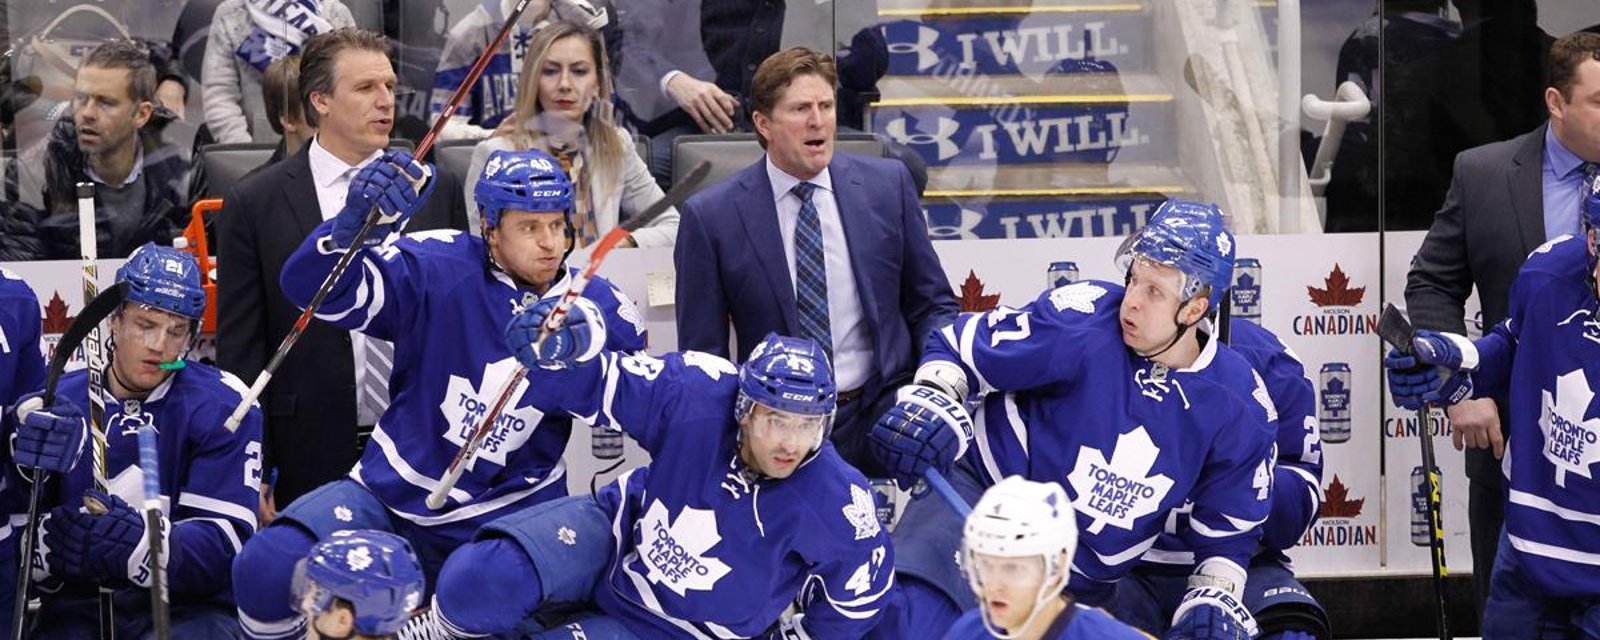 Approaching Playoffs, Leafs are confident, pumped up! 